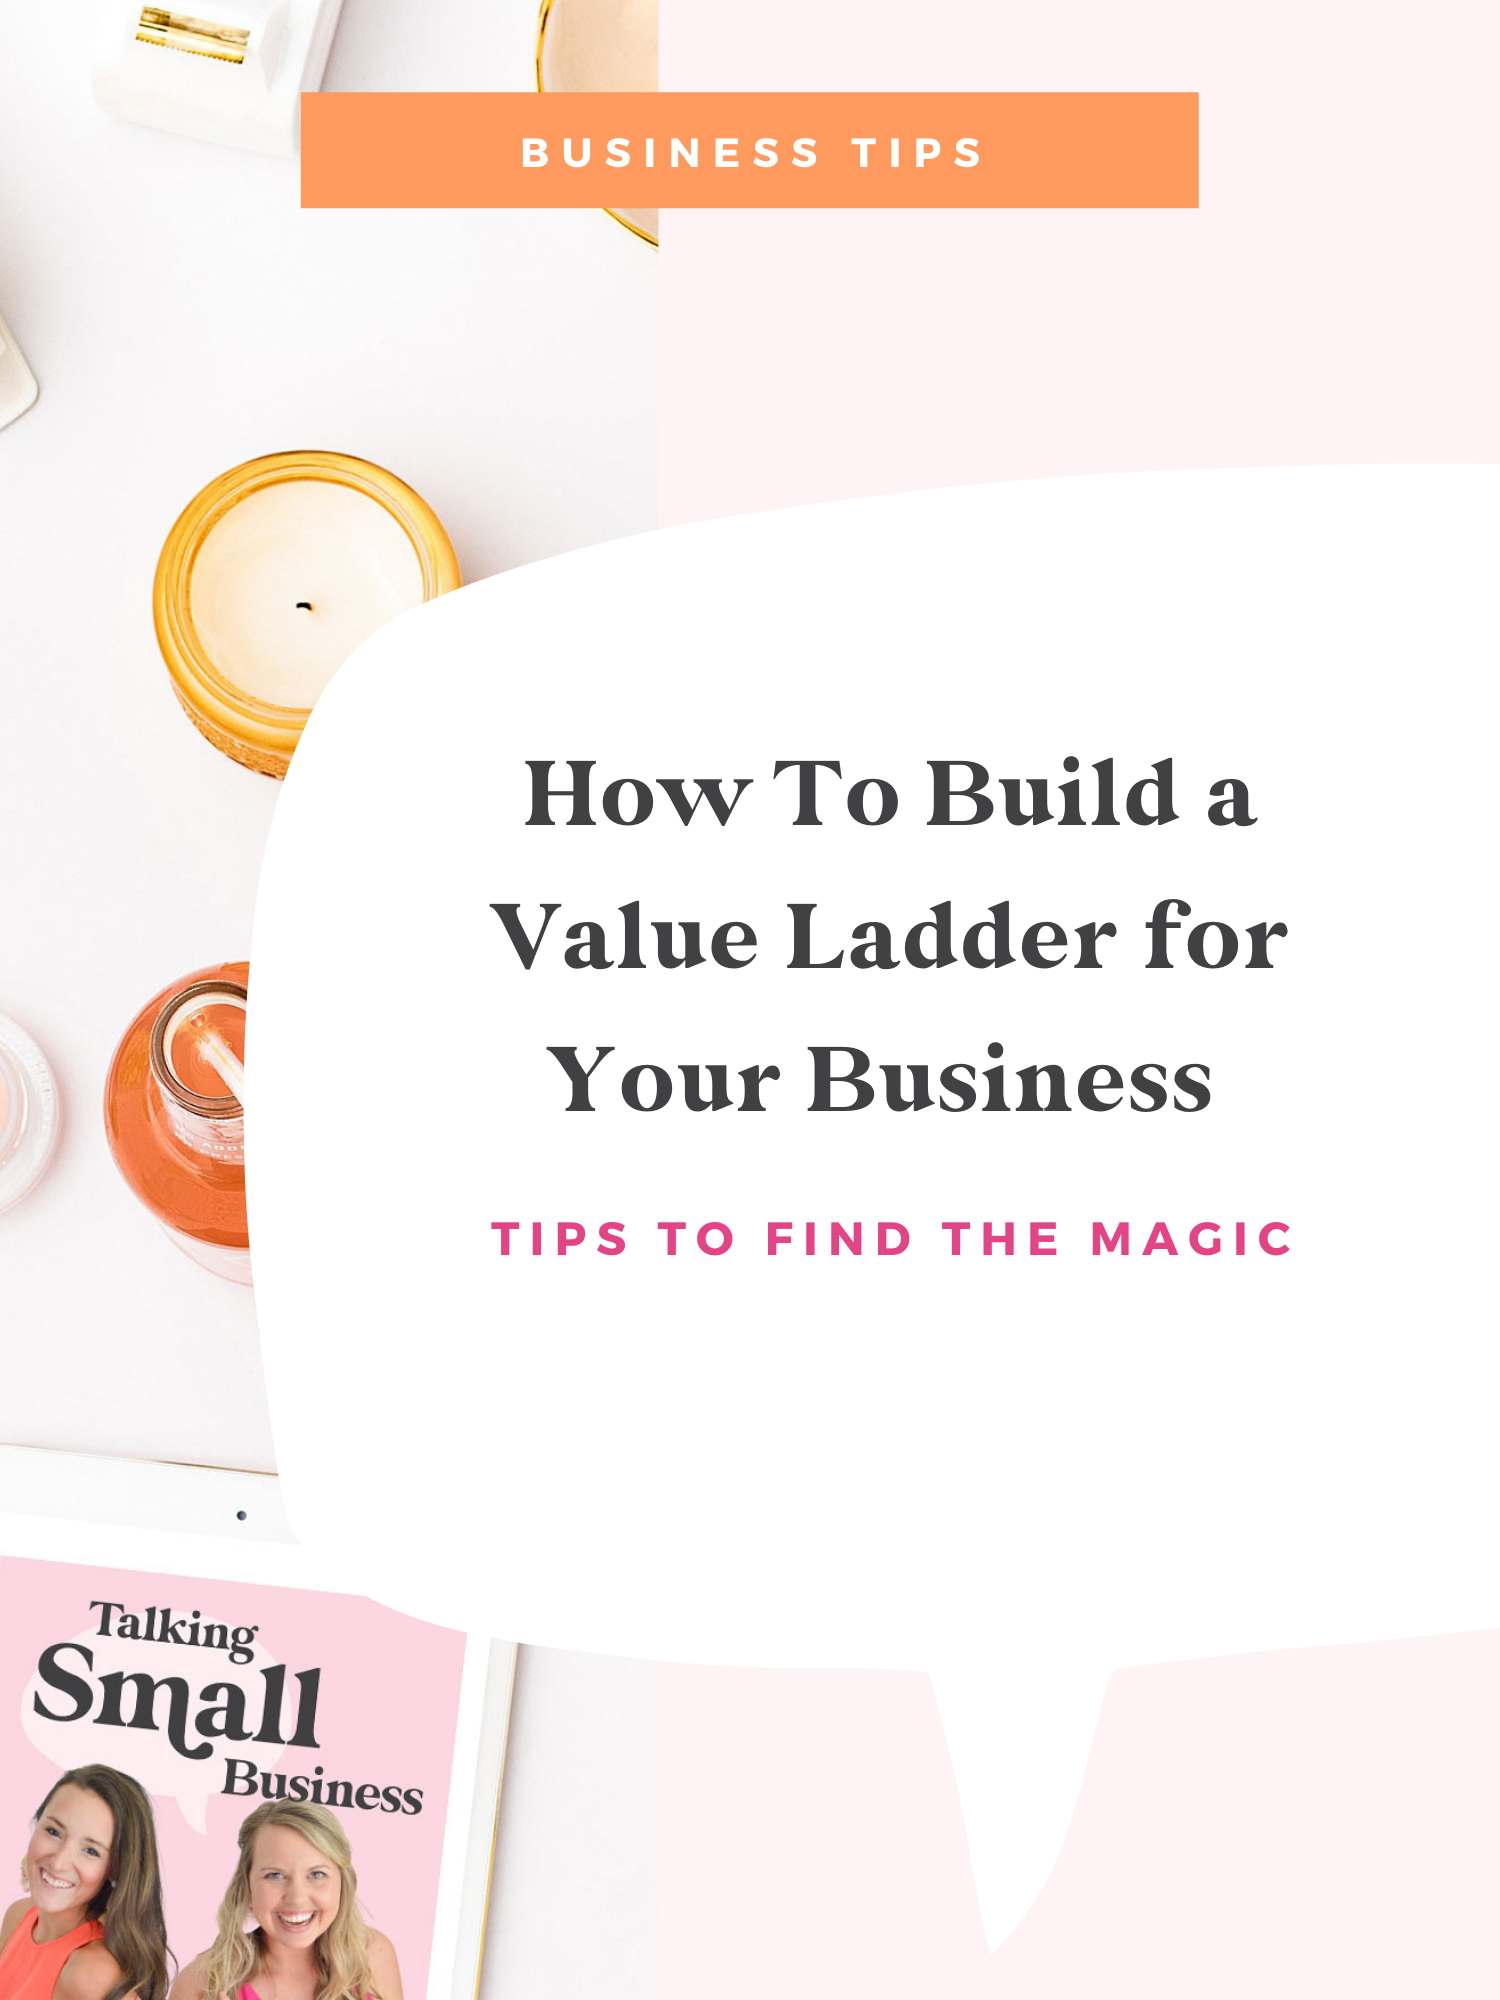 How to practically build a value ladder for your business to increase sales and connect your offers: a candid talk on Talking Small Business